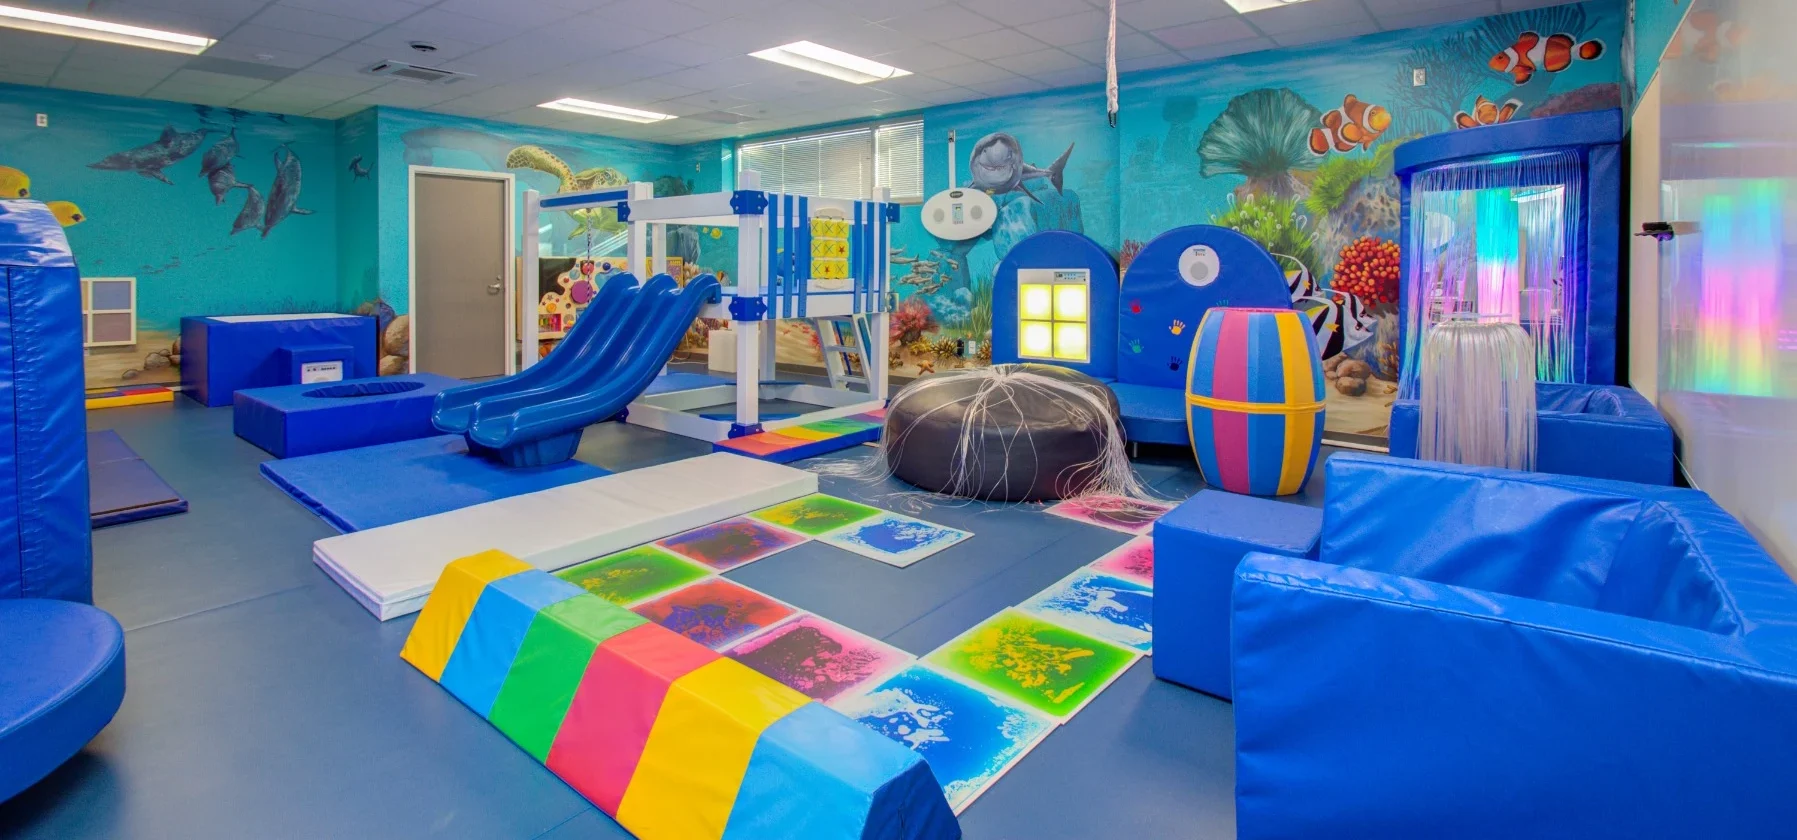 The Top 5 Benefits to Creating a Sensory Room in School, at Home, or as an Addition to Public Spaces